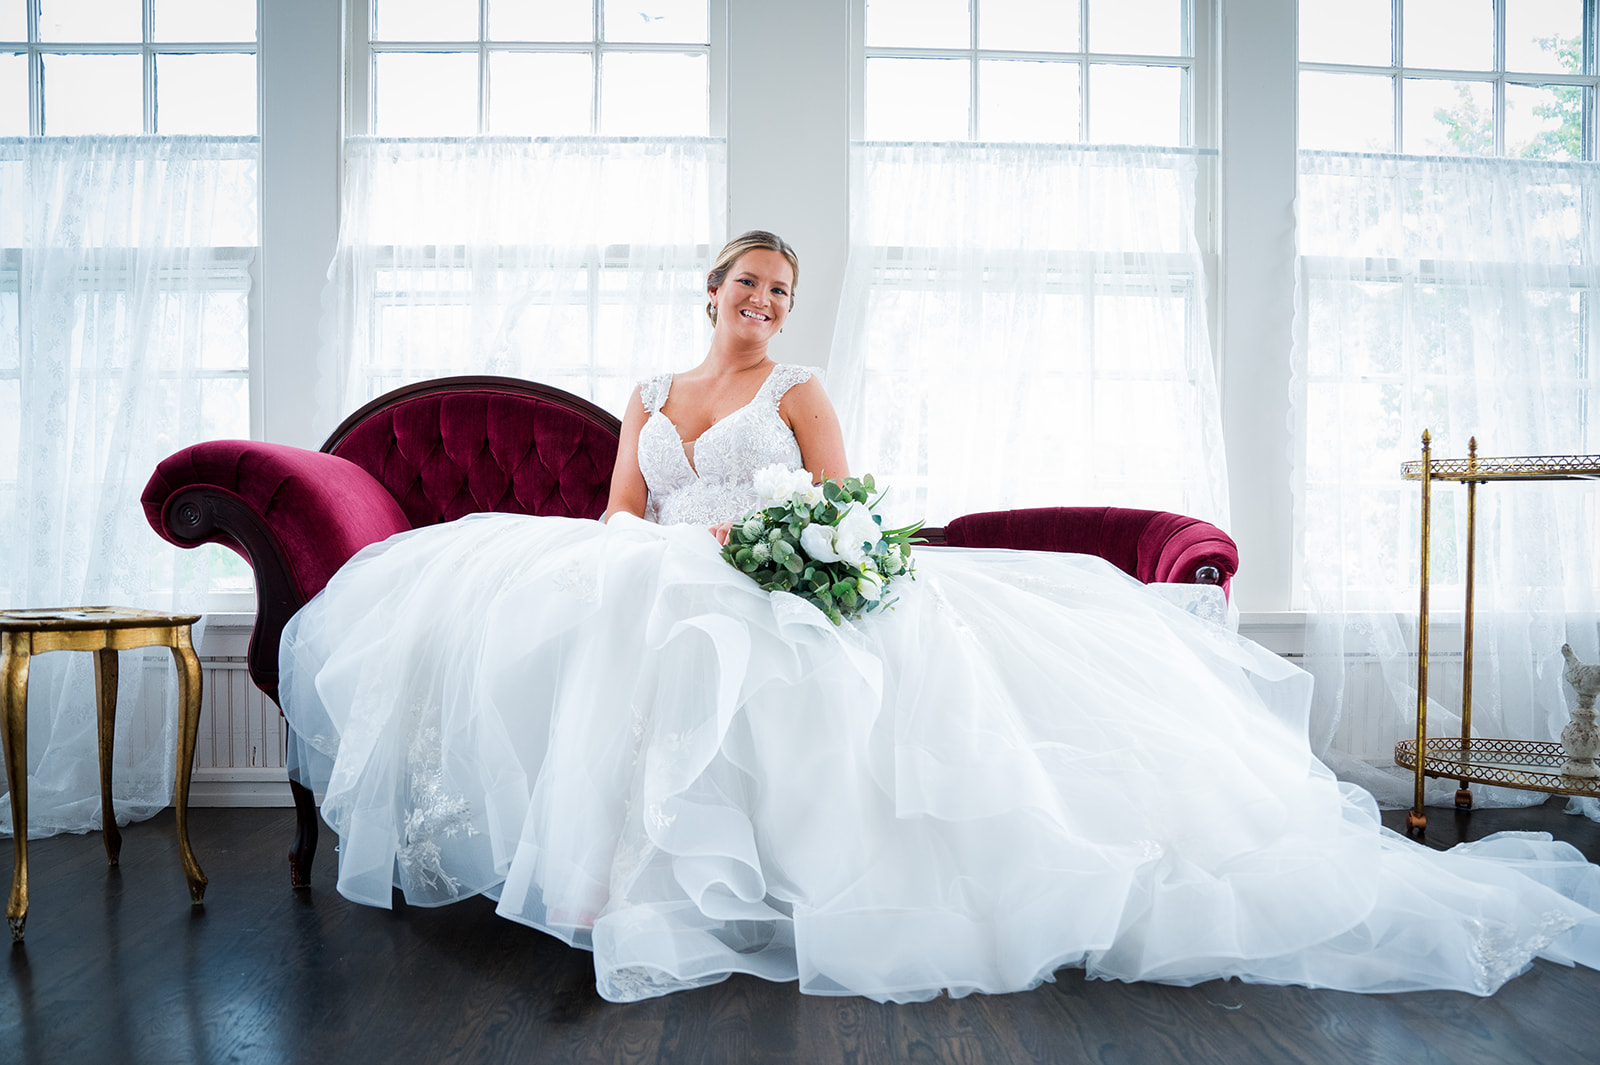 Bride sits on a red velvet couch in her wedding dress.